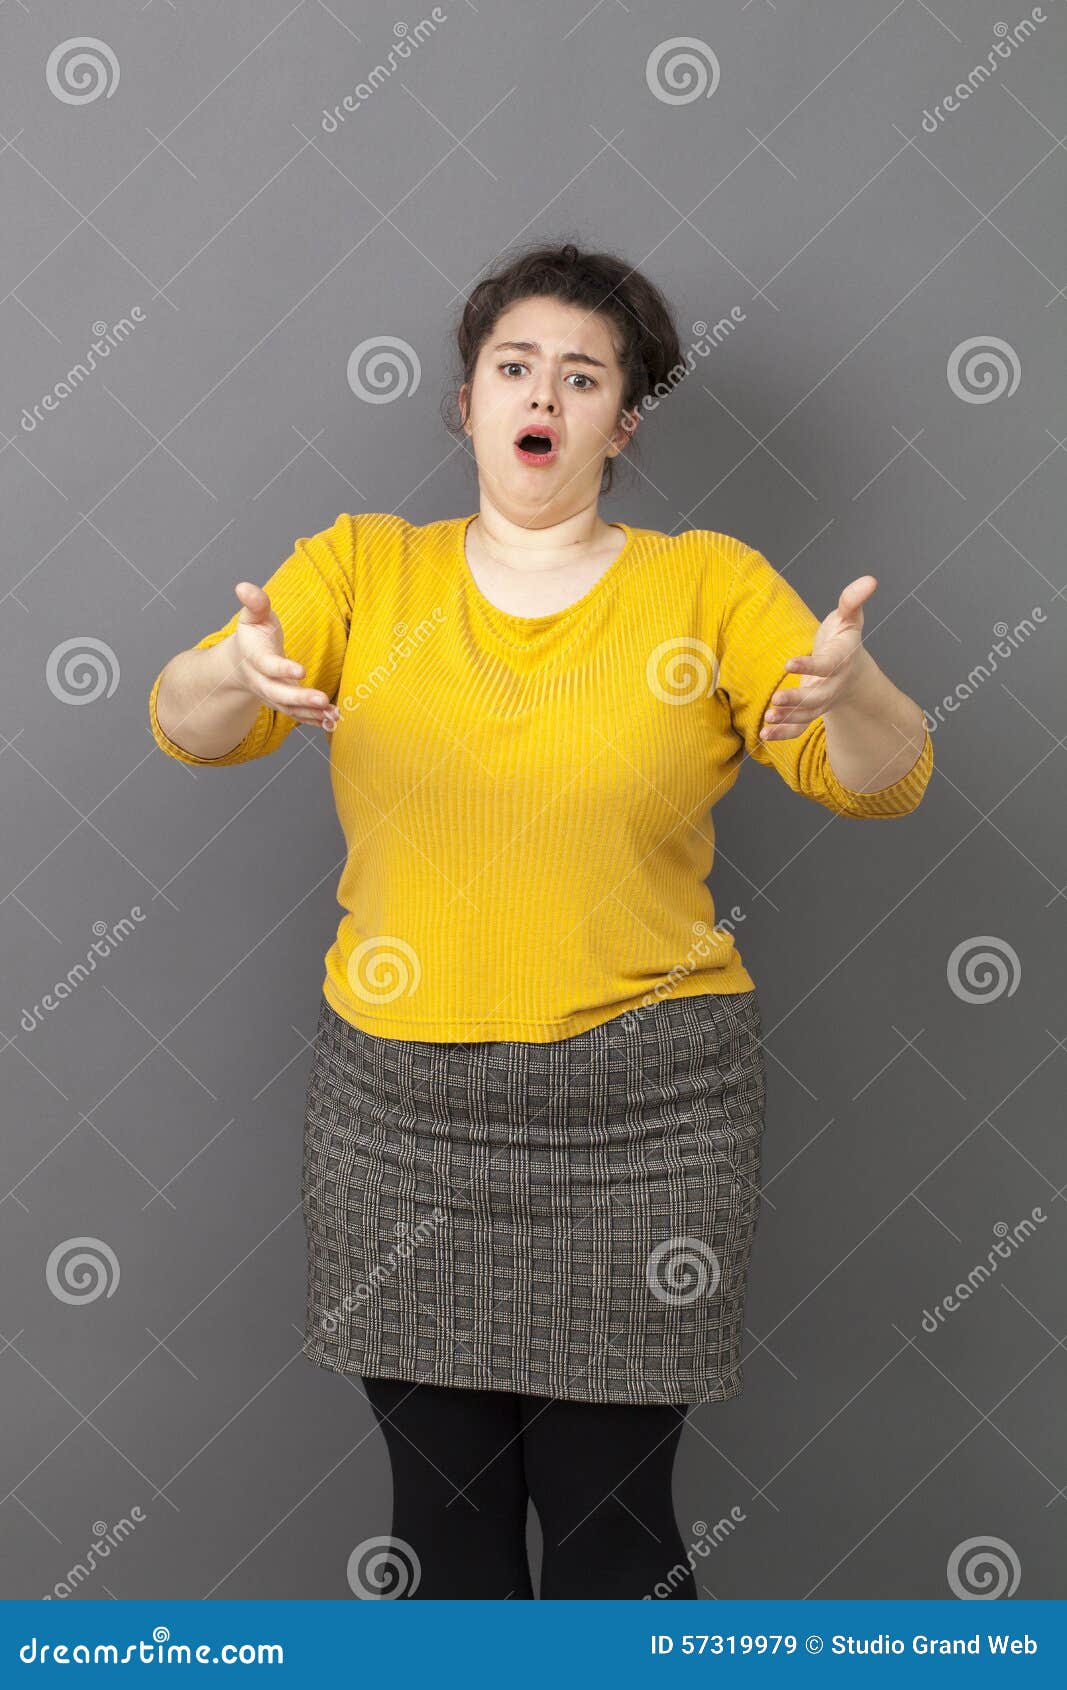 https://thumbs.dreamstime.com/z/unhappy-fat-young-woman-complaining-overweight-stress-s-expressing-exasperation-frustration-front-someone-57319979.jpg